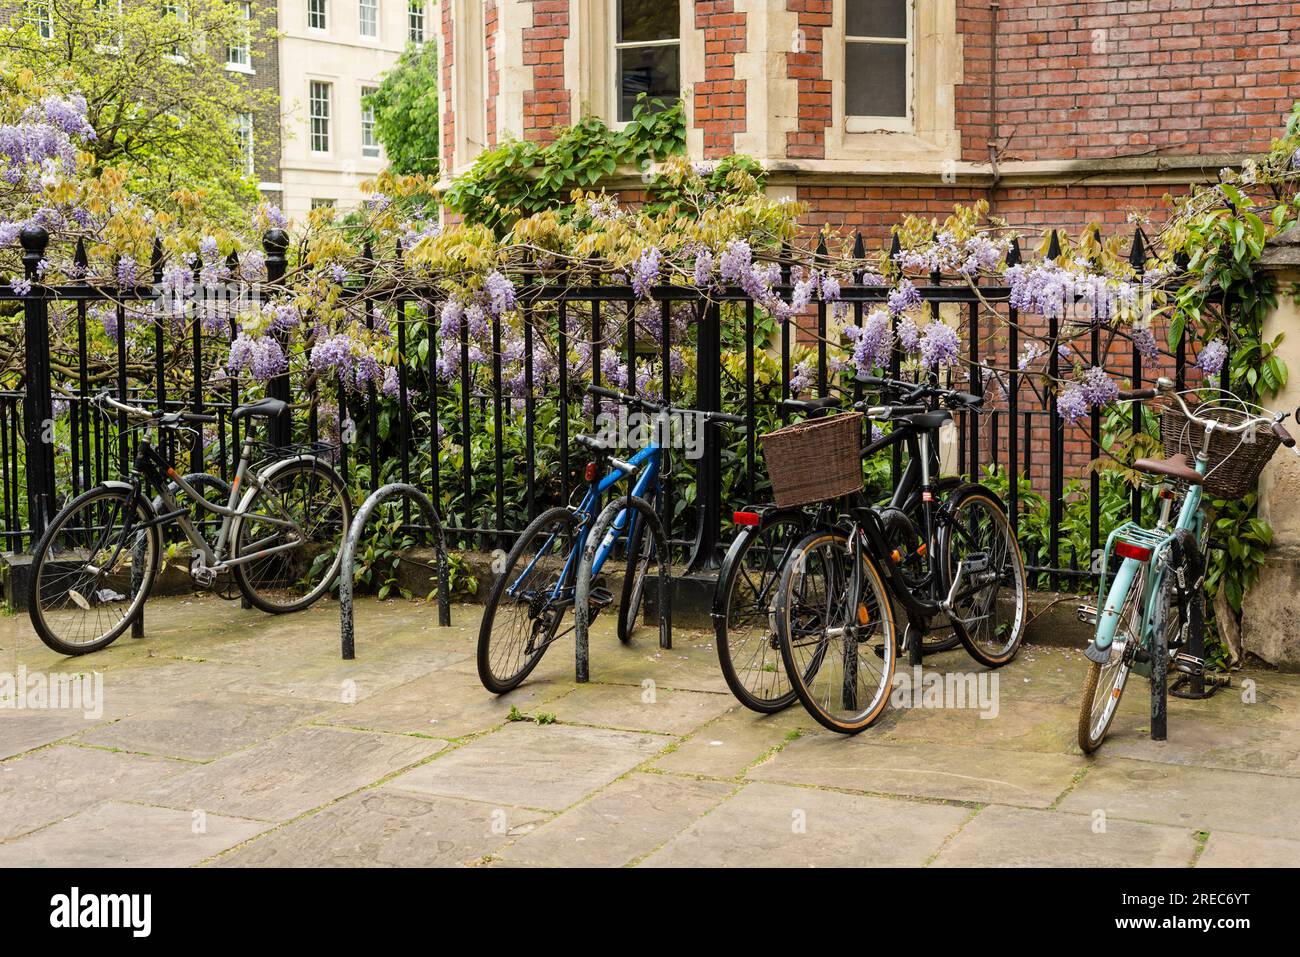 Bicycles parked along Wrought iron railings, Inns of Court, London, UK Stock Photo